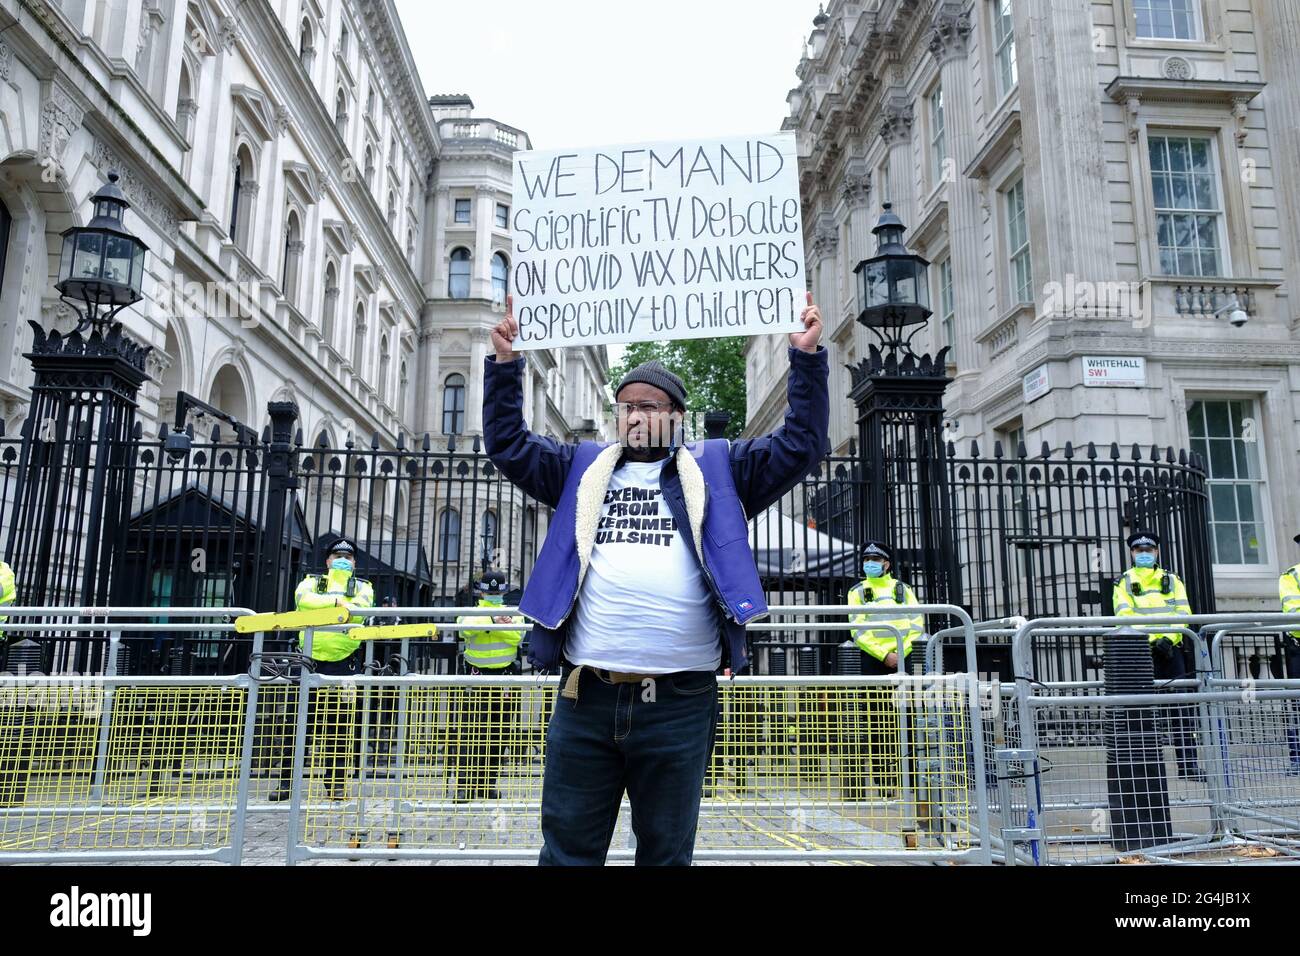 A protester stands with a placard asking for tranparency about the Covid-19 vaccine risks as the roll out will soon extend to children. Stock Photo